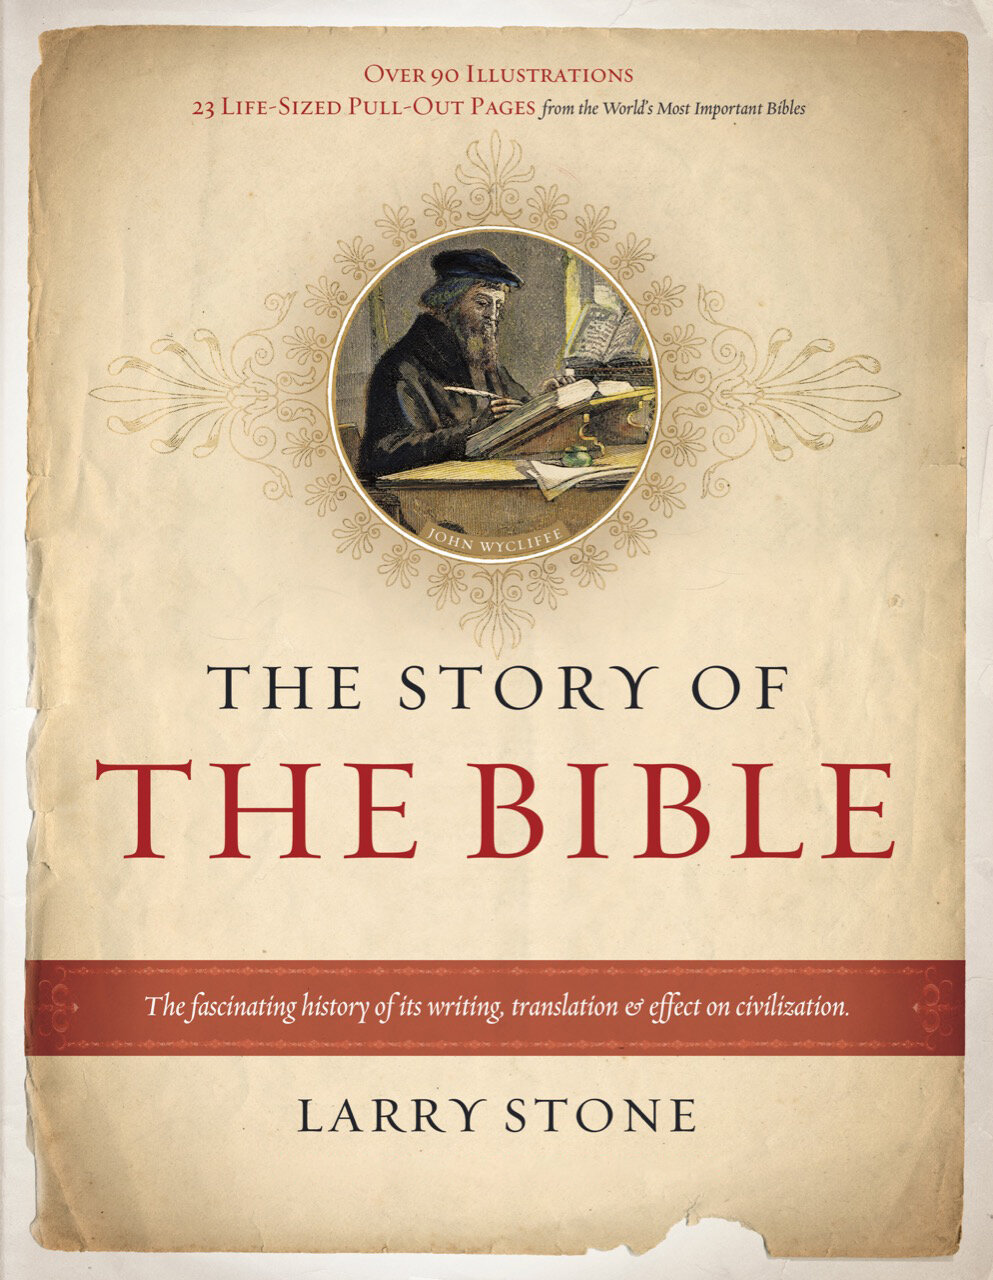 The Story of the Bible: A Fascinating History of Its Writing, Translation & Effect on Civilization